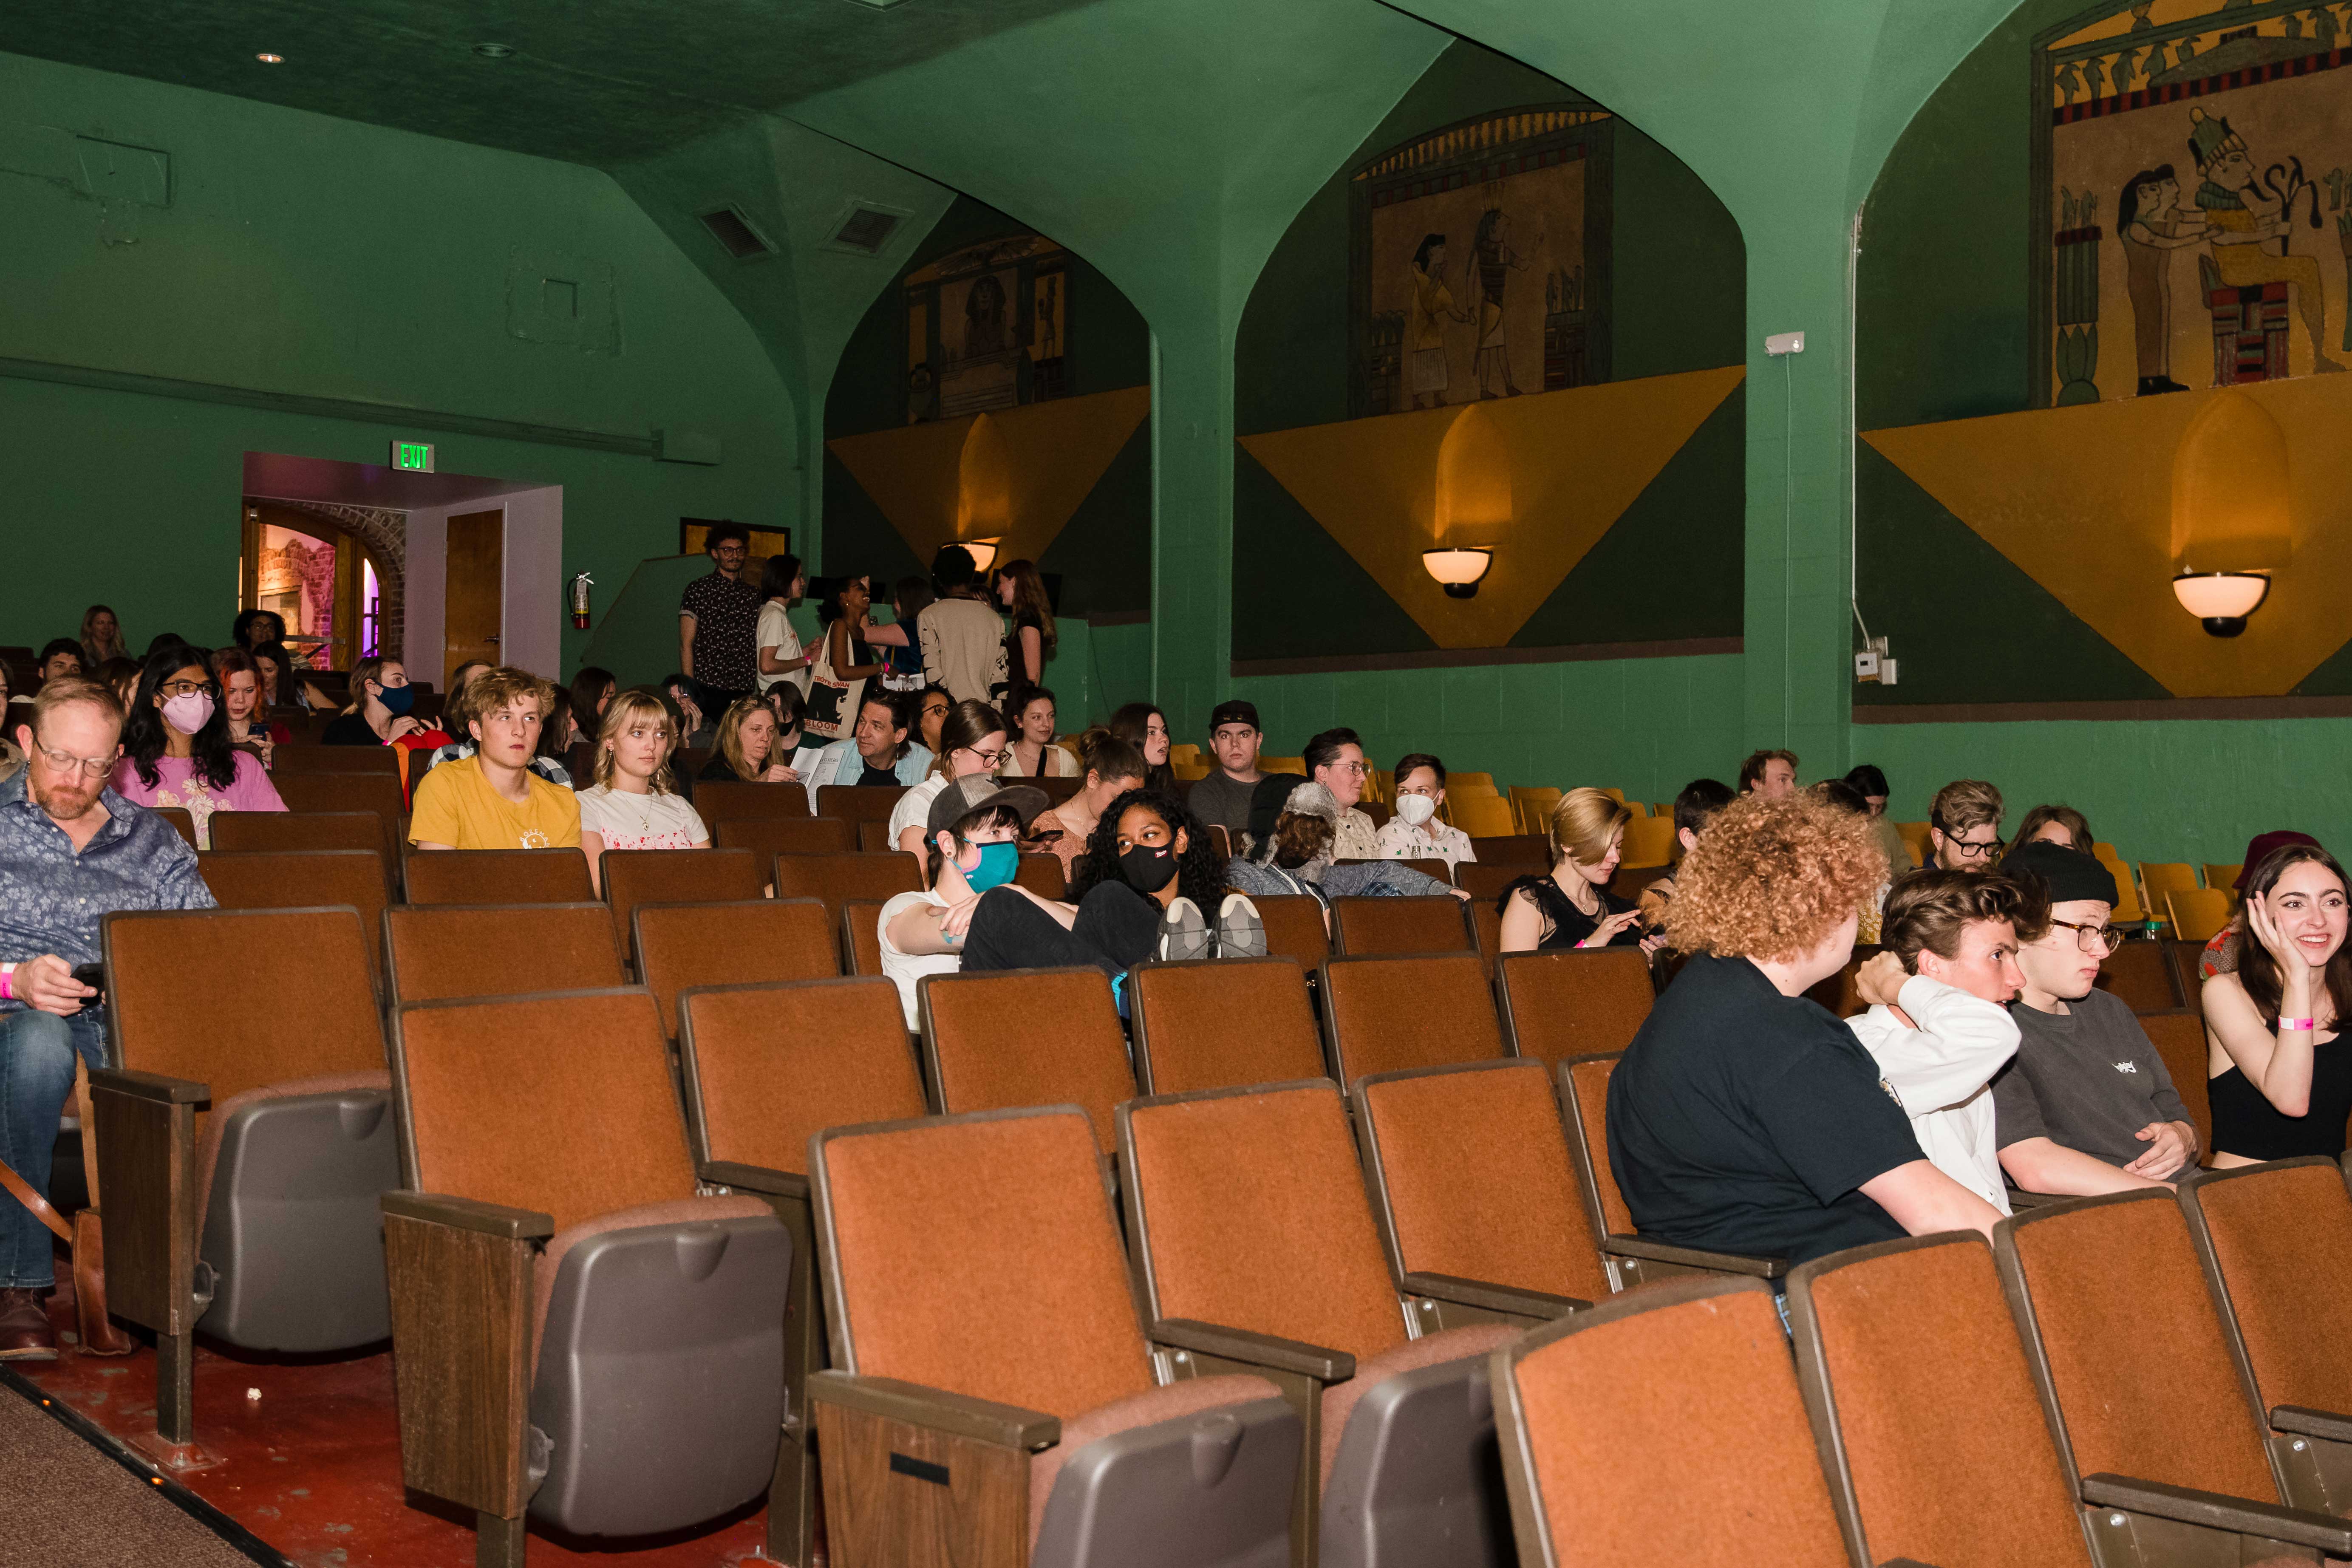 Theater will Egyptian motifs on the walls and people sitting in rows of stacked chairs.